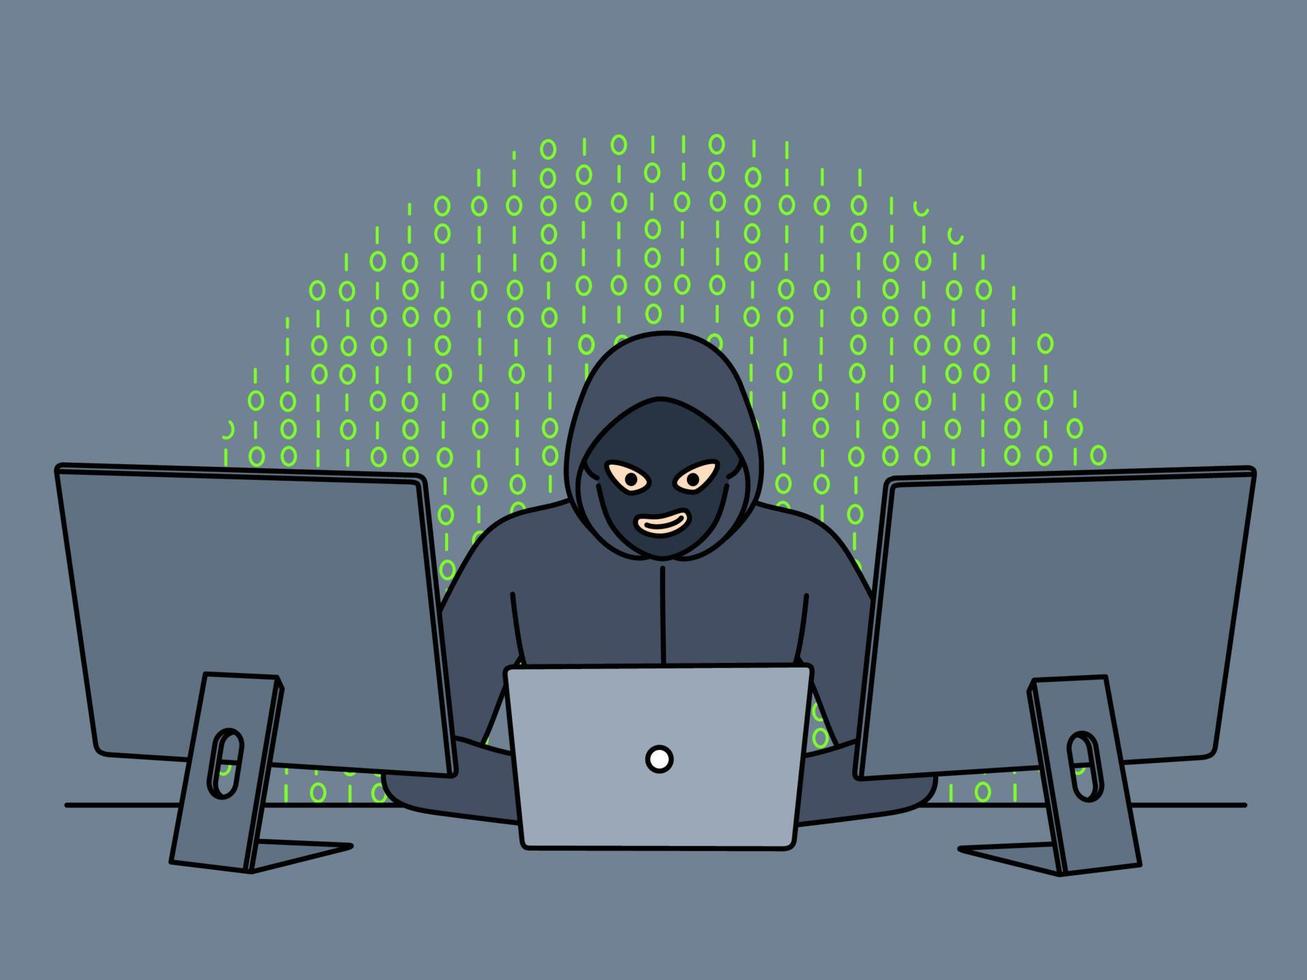 Male hacker in hoodie and mask sit at table work on computers steal personal information. Anonymous criminal hack programs and websites on PC. Vector illustration.